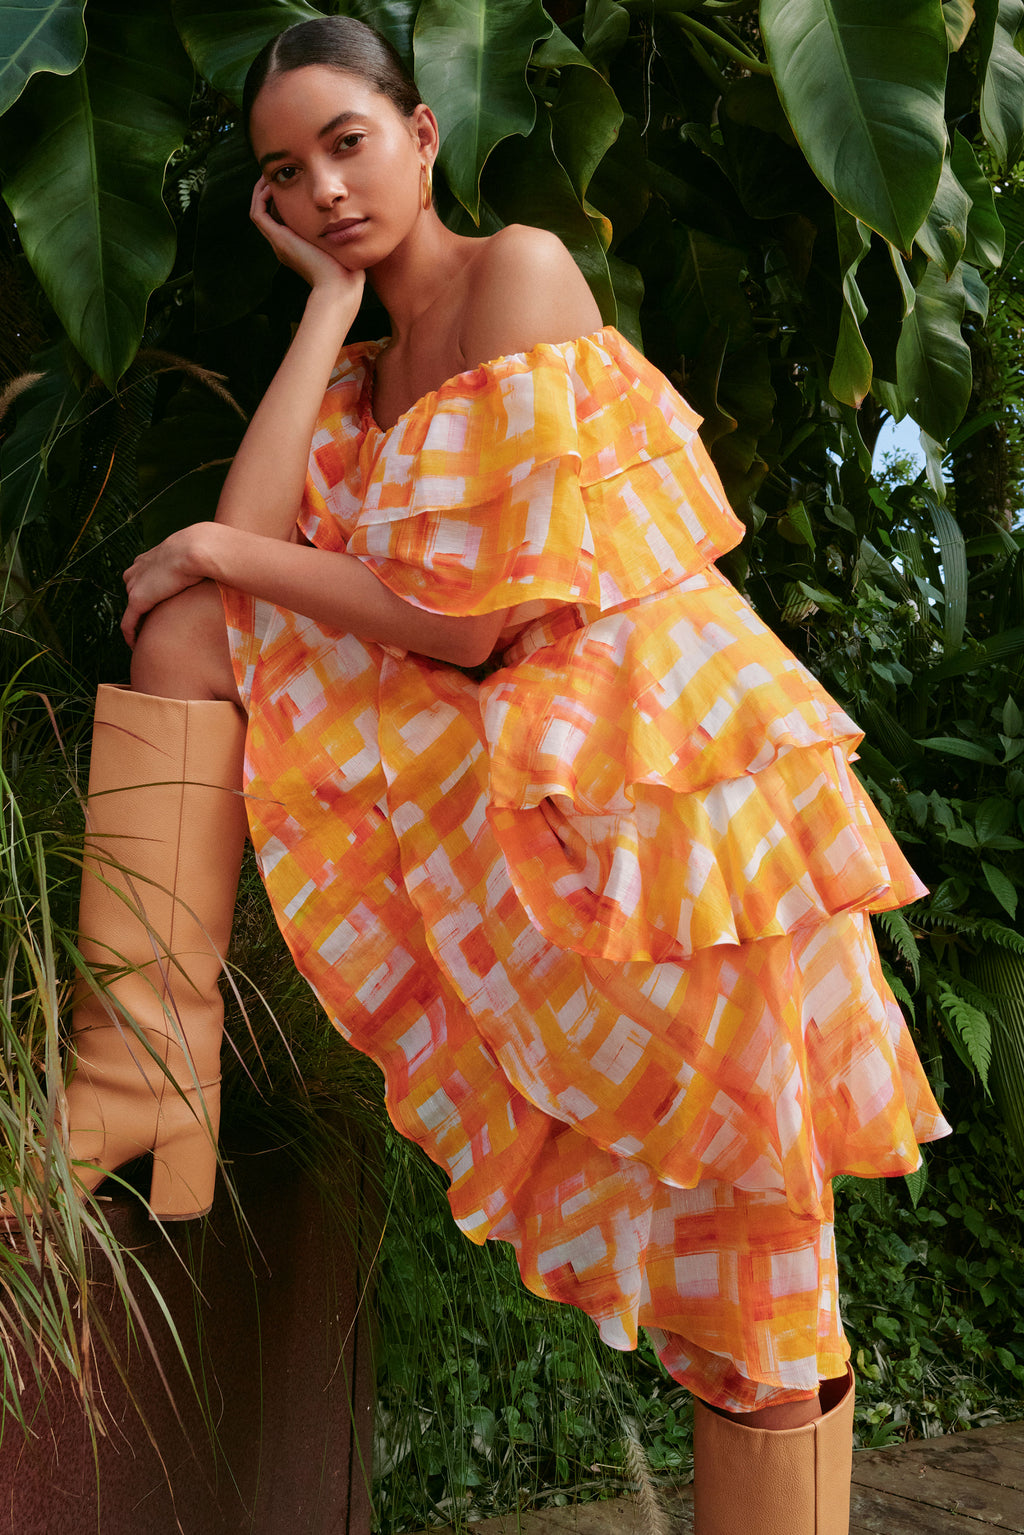 Maxi skirt with ruffled tiers in an orange and yellow plaid print